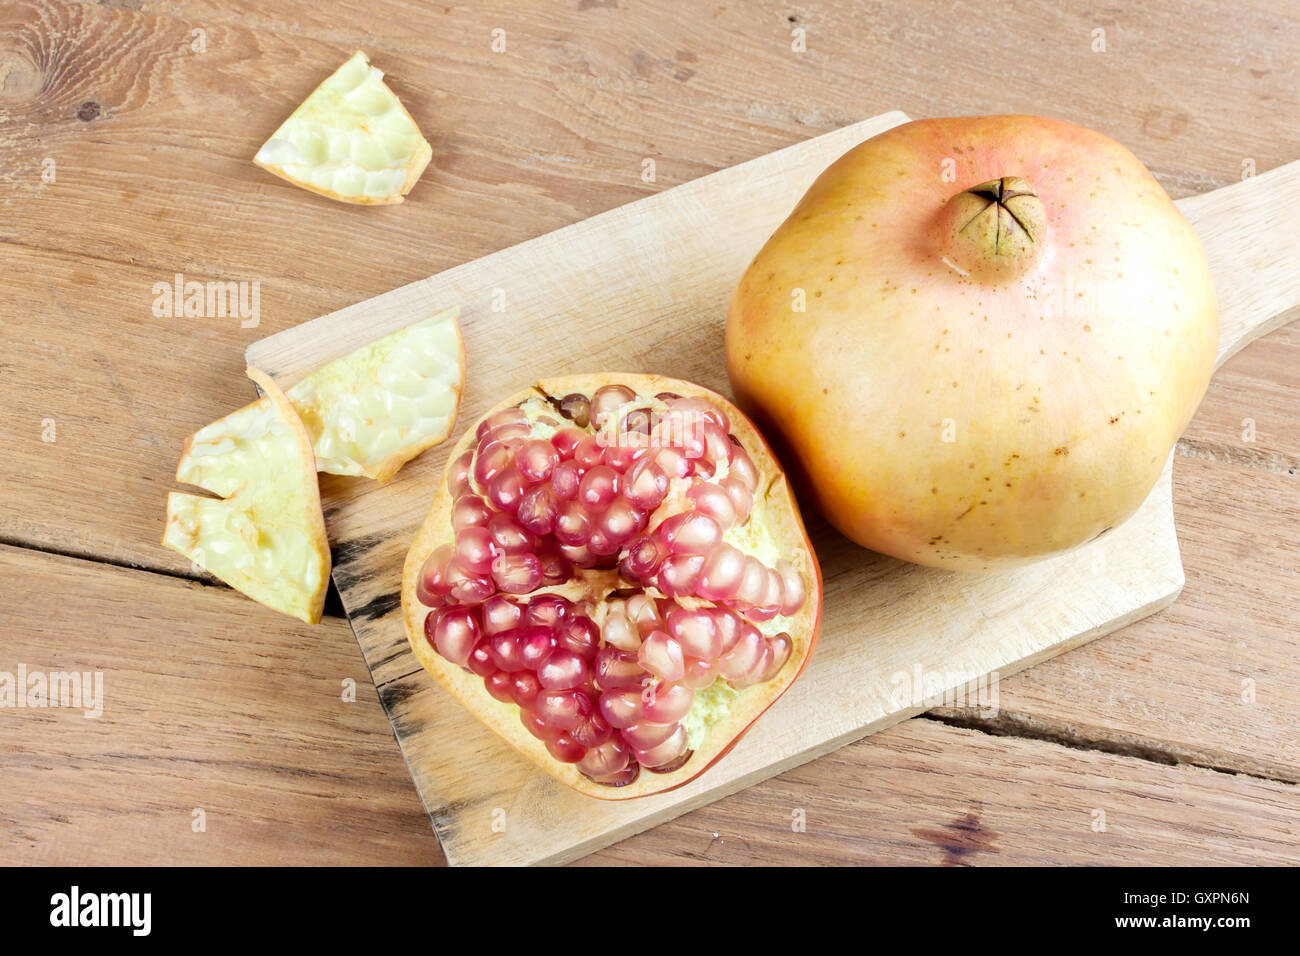 Pomegranate fruit cut dissect on wooden background. Stock Photo